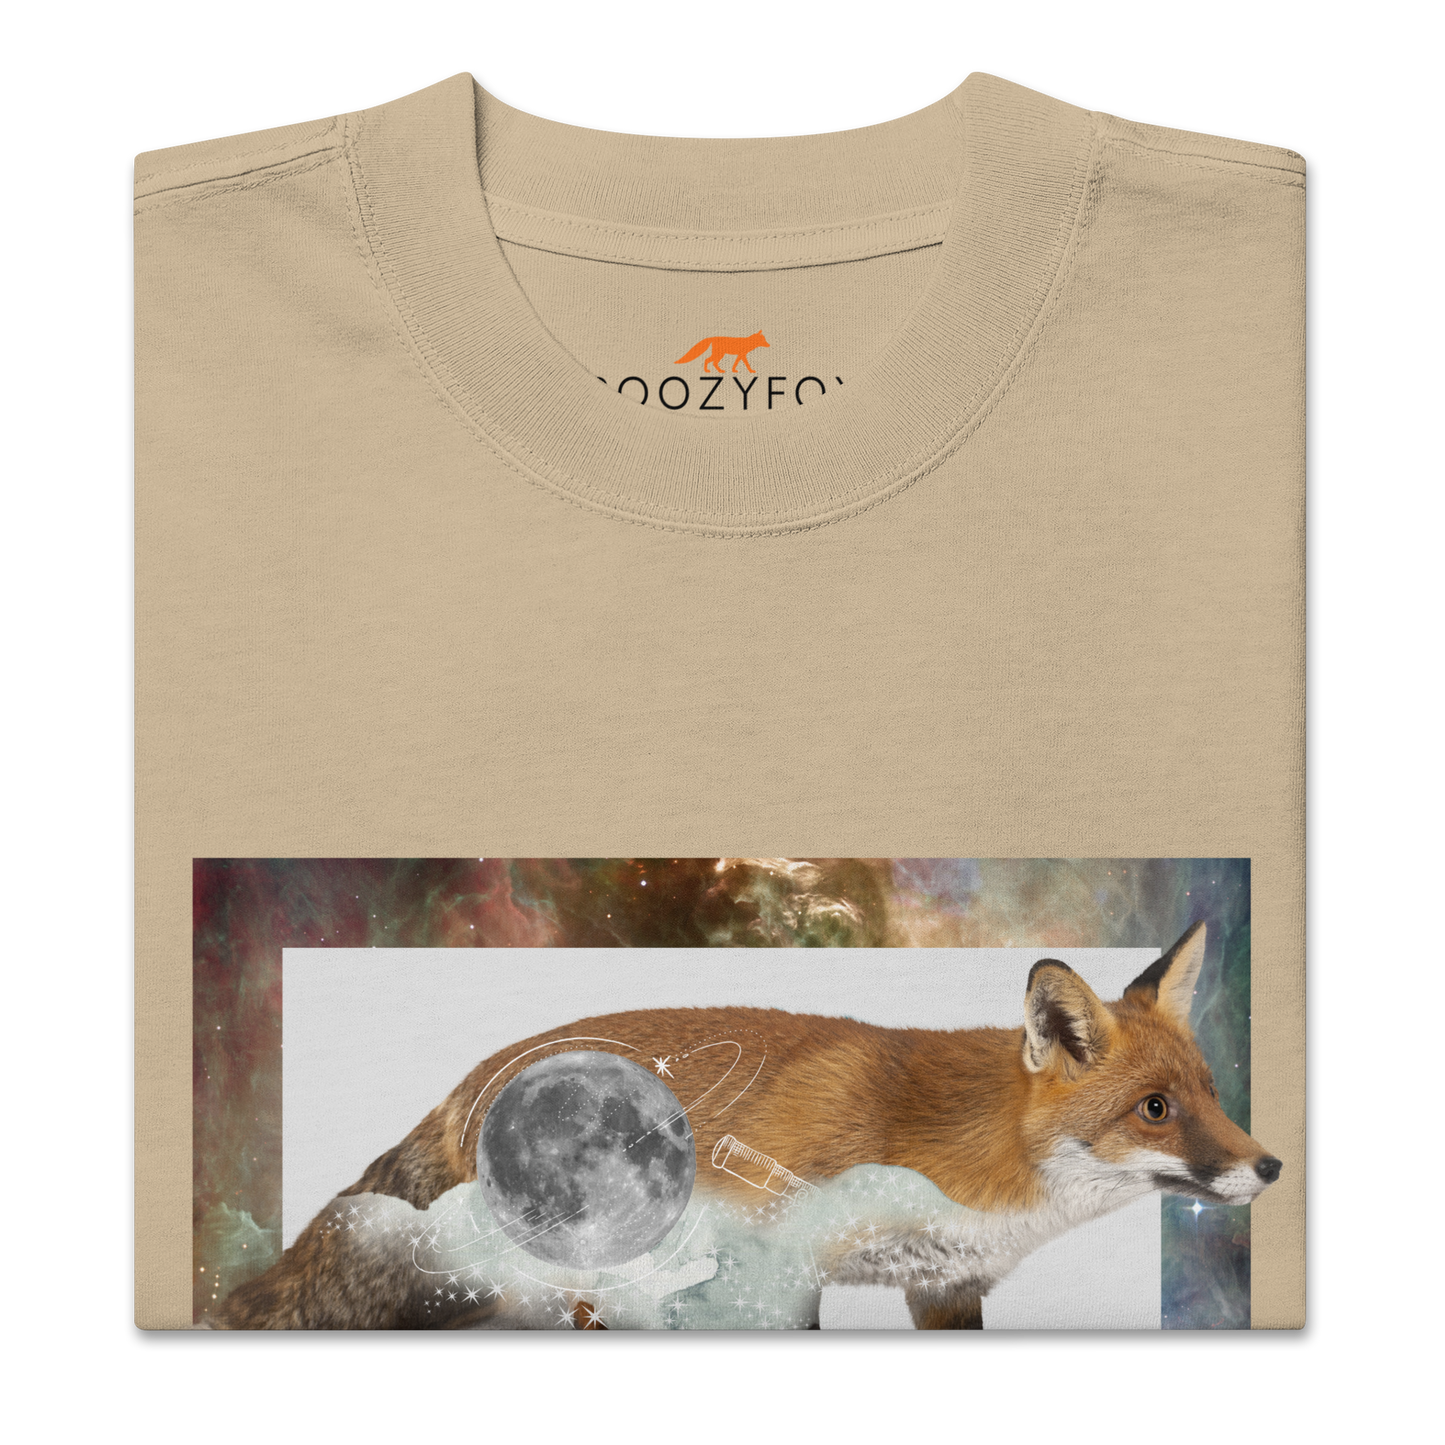 Product details of a Faded Khaki Fox Oversized T-Shirt featuring a stellar Space Fox graphic on the chest - Cool Graphic Fox Oversized Tees - Boozy Fox